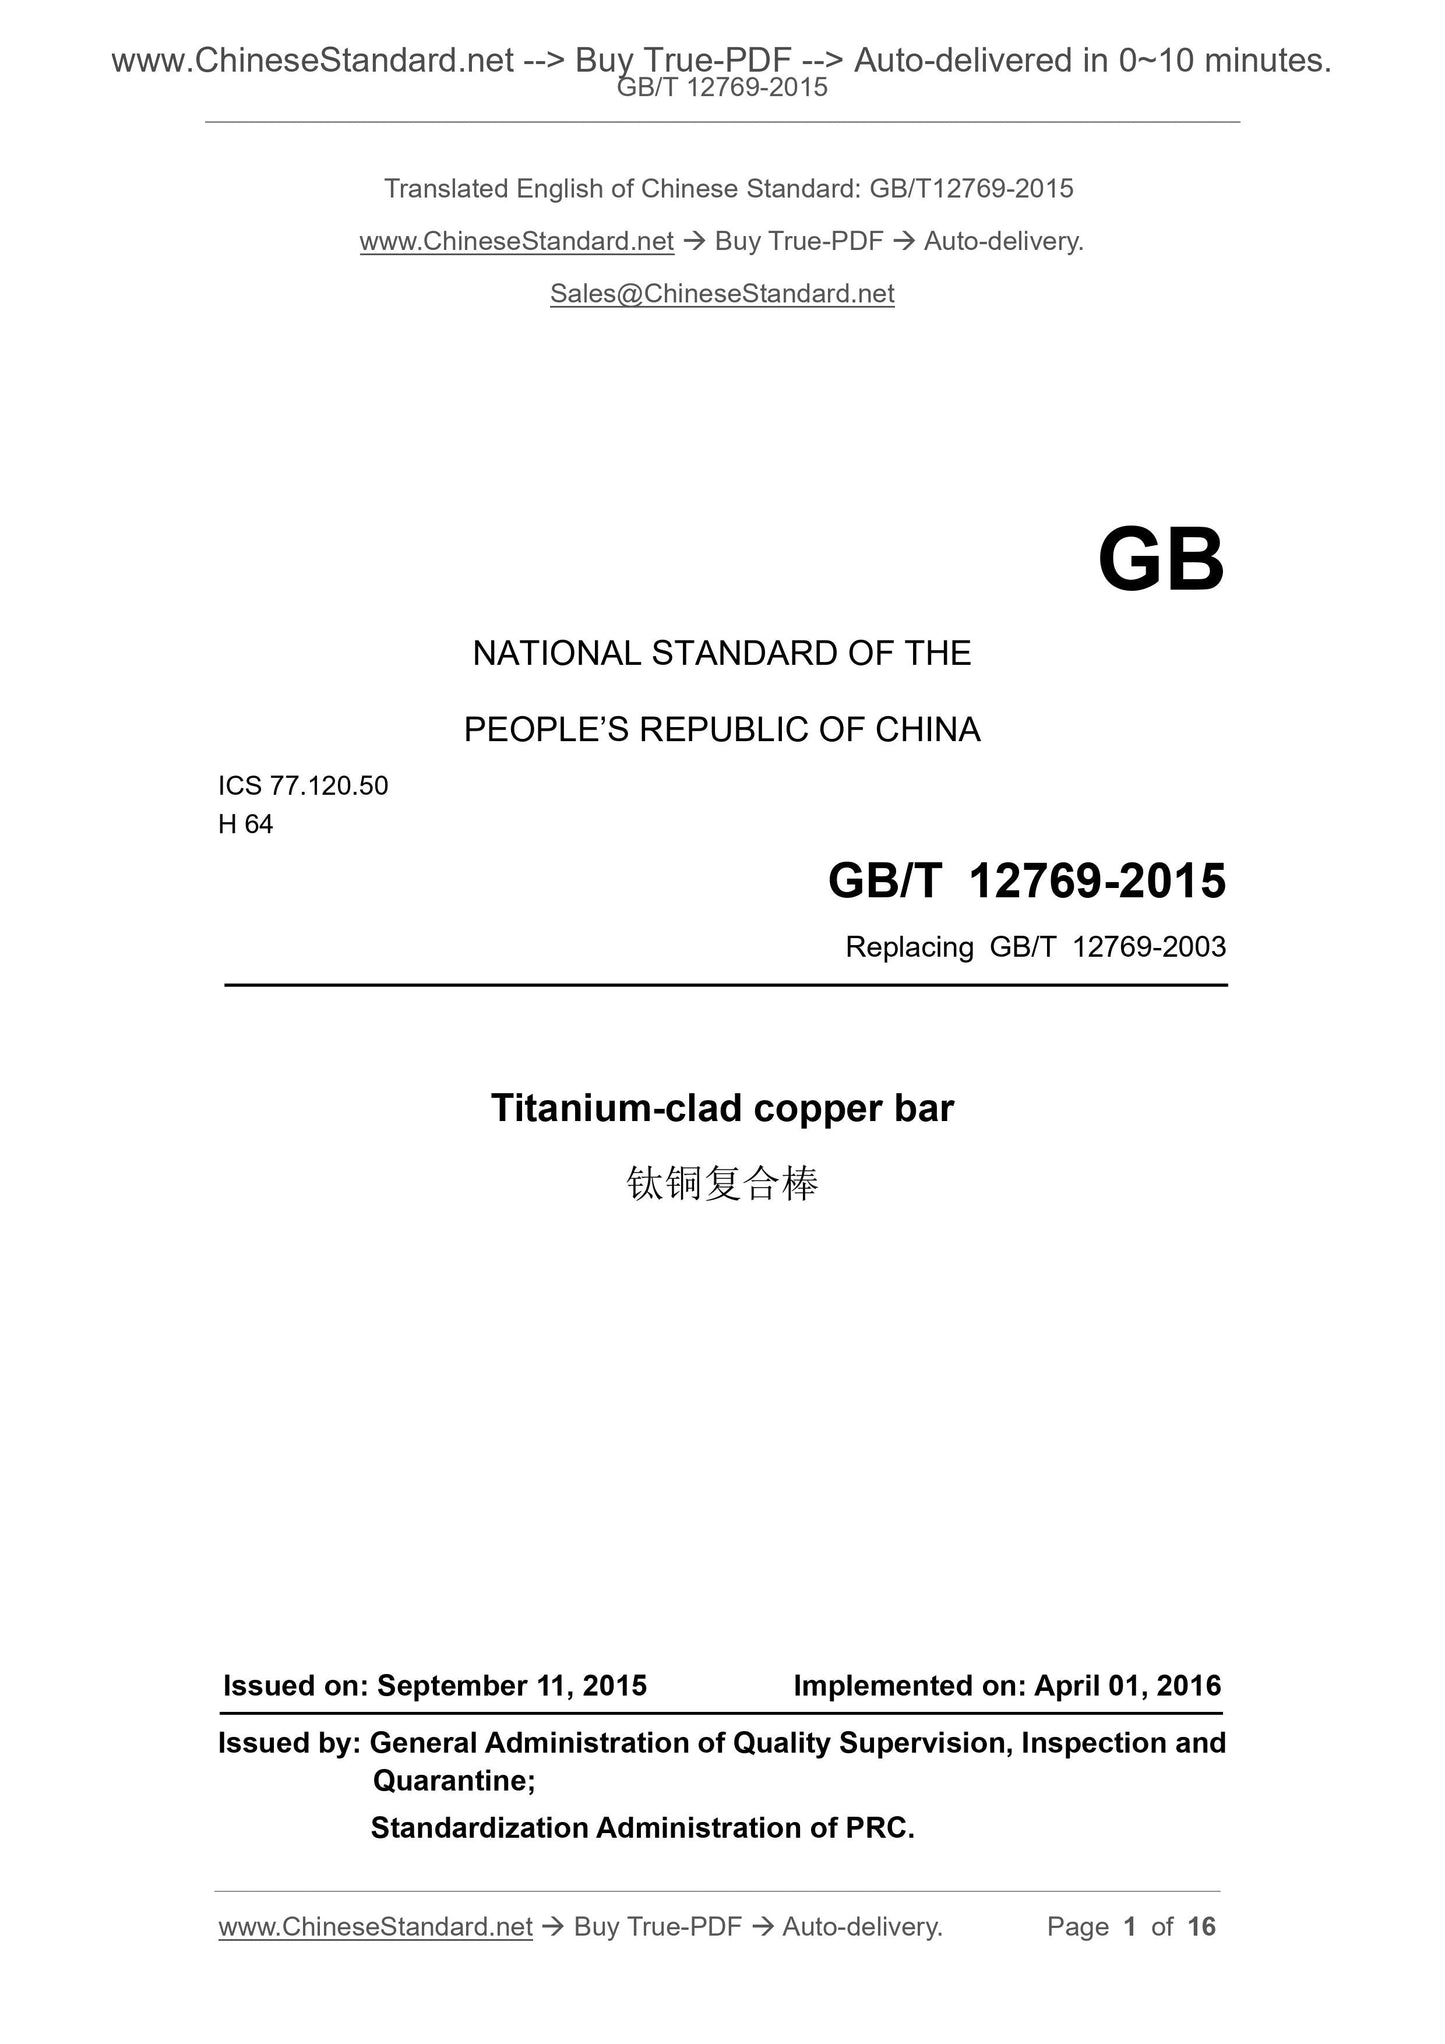 GB/T 12769-2015 Page 1